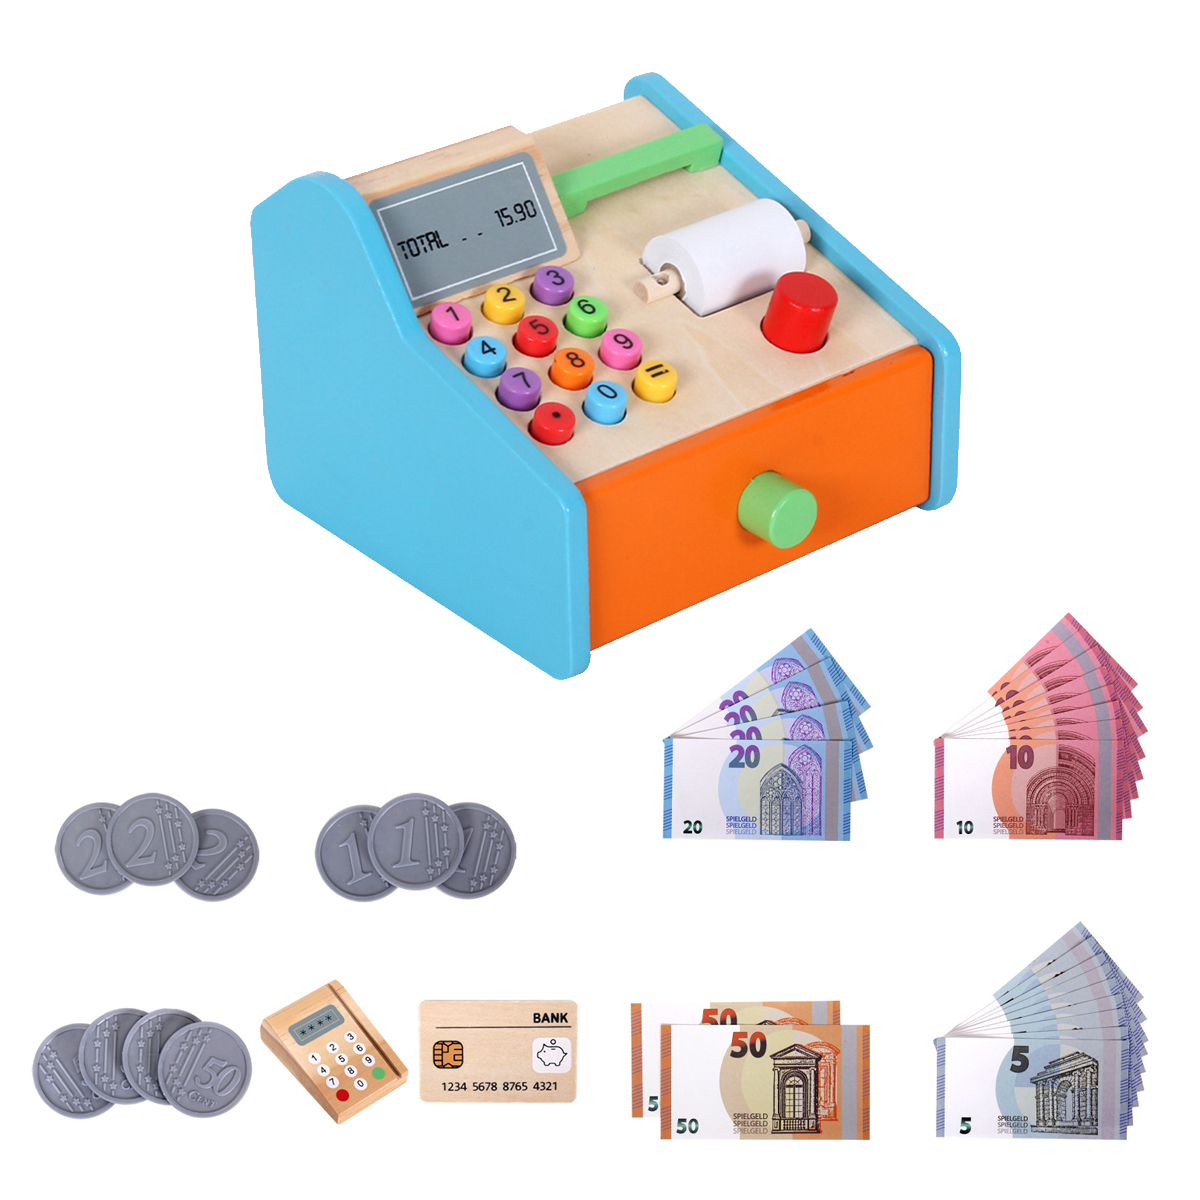 Wooden-Cash-Register-Shop-Grocery-Checkout-Play-Game-Learn-Education-Toys-for-Kids-Perfect-Gift-1685525-3